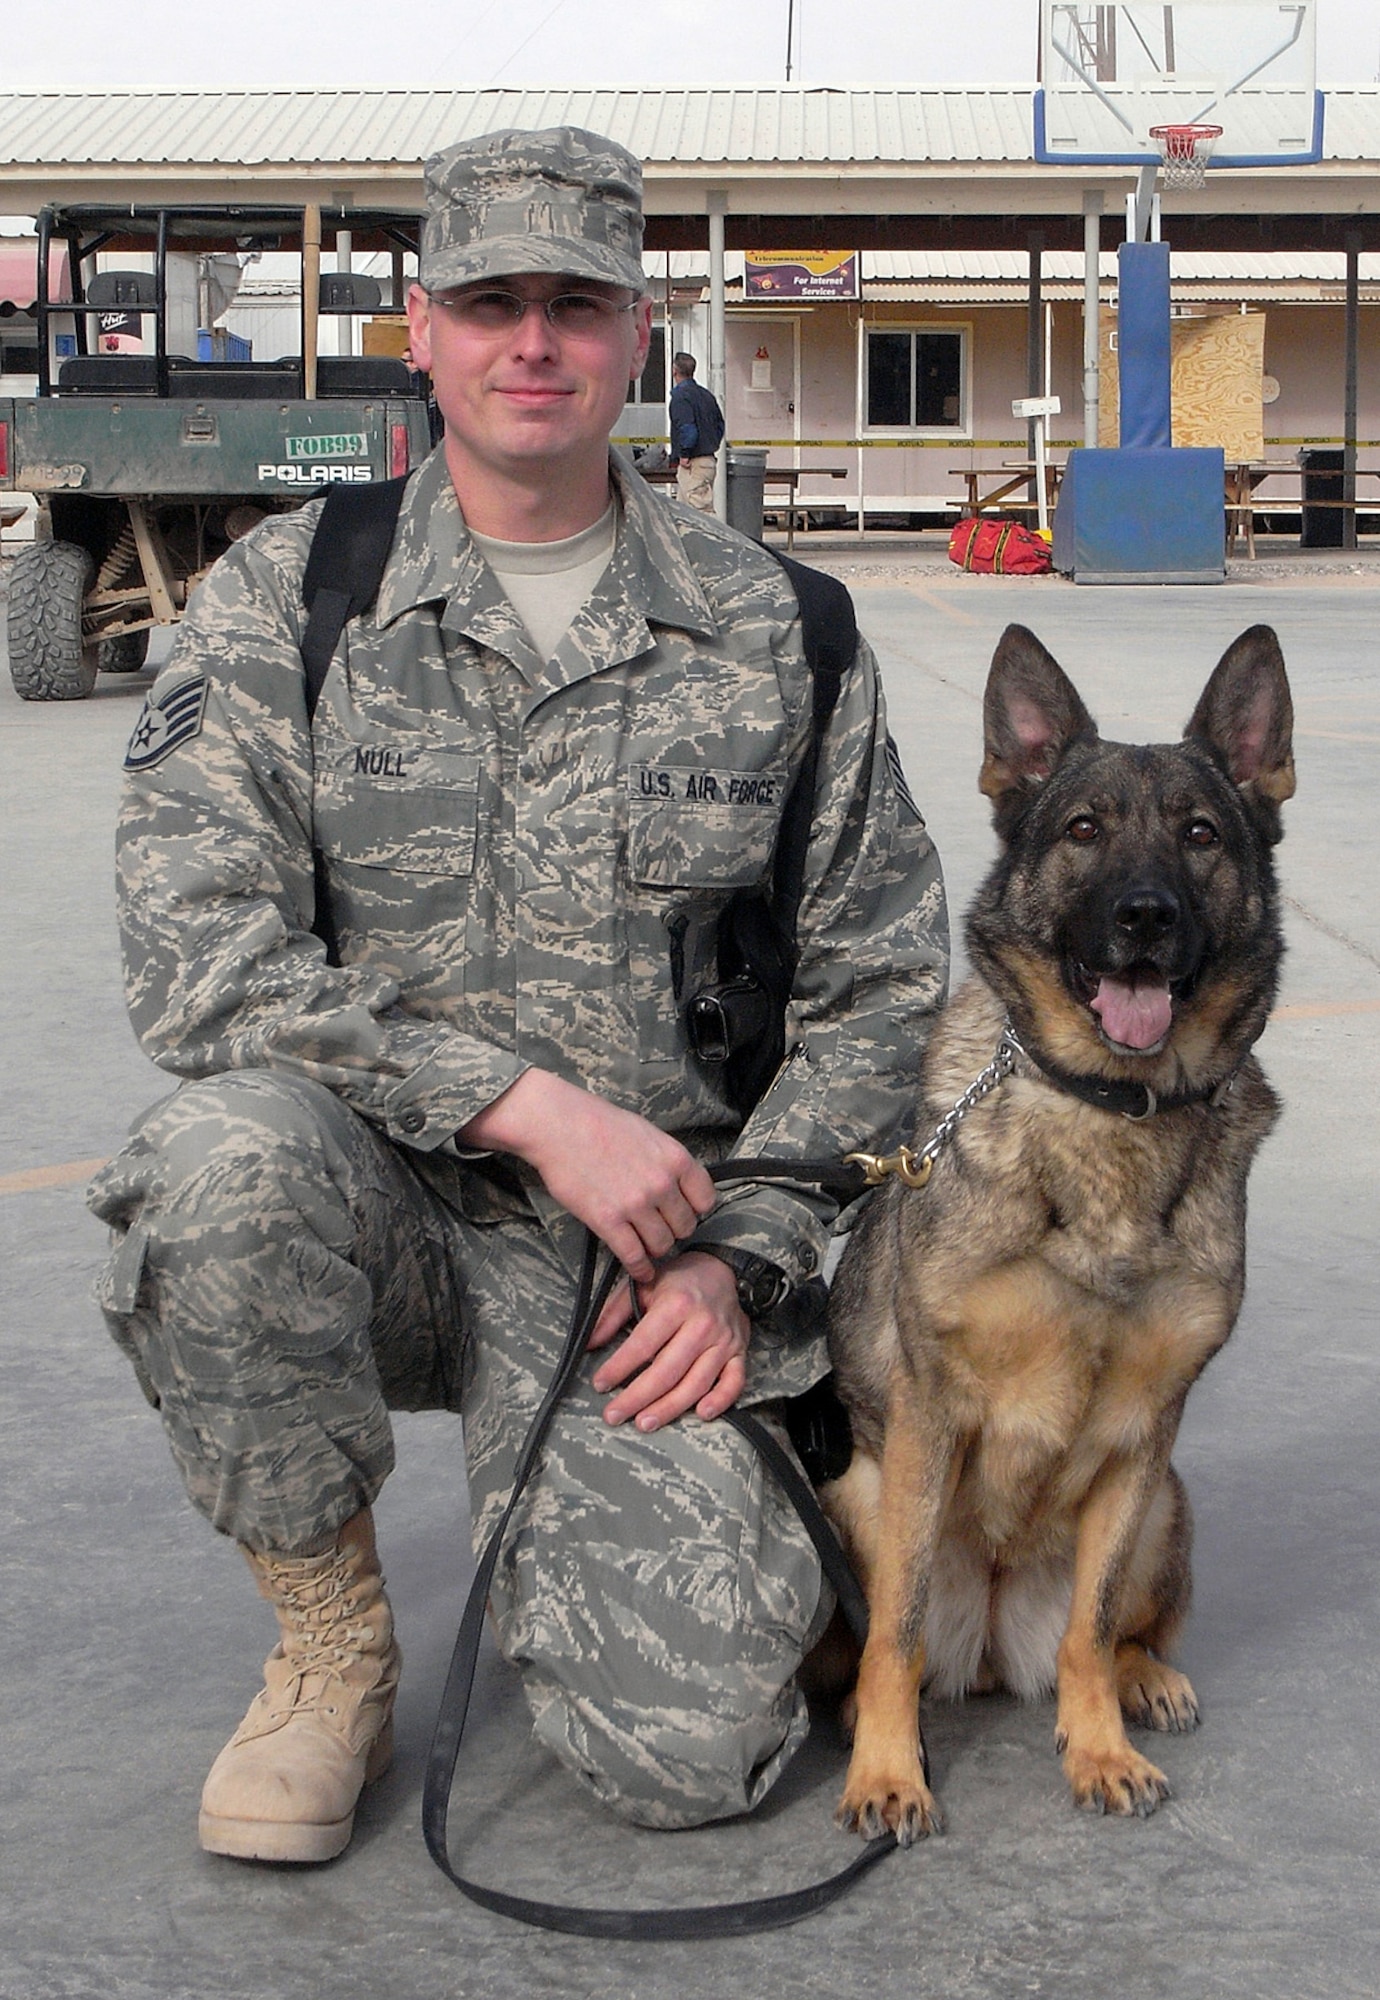 CAMP BUCCA, Iraq -- Staff Sgt. Joseph Null, 42nd Military Police Brigade military working dog handler, is deployed from the 52nd Security Forces Squadron at Spangdahlem Air Base, Germany. (U.S. Air Force courtesy photo)